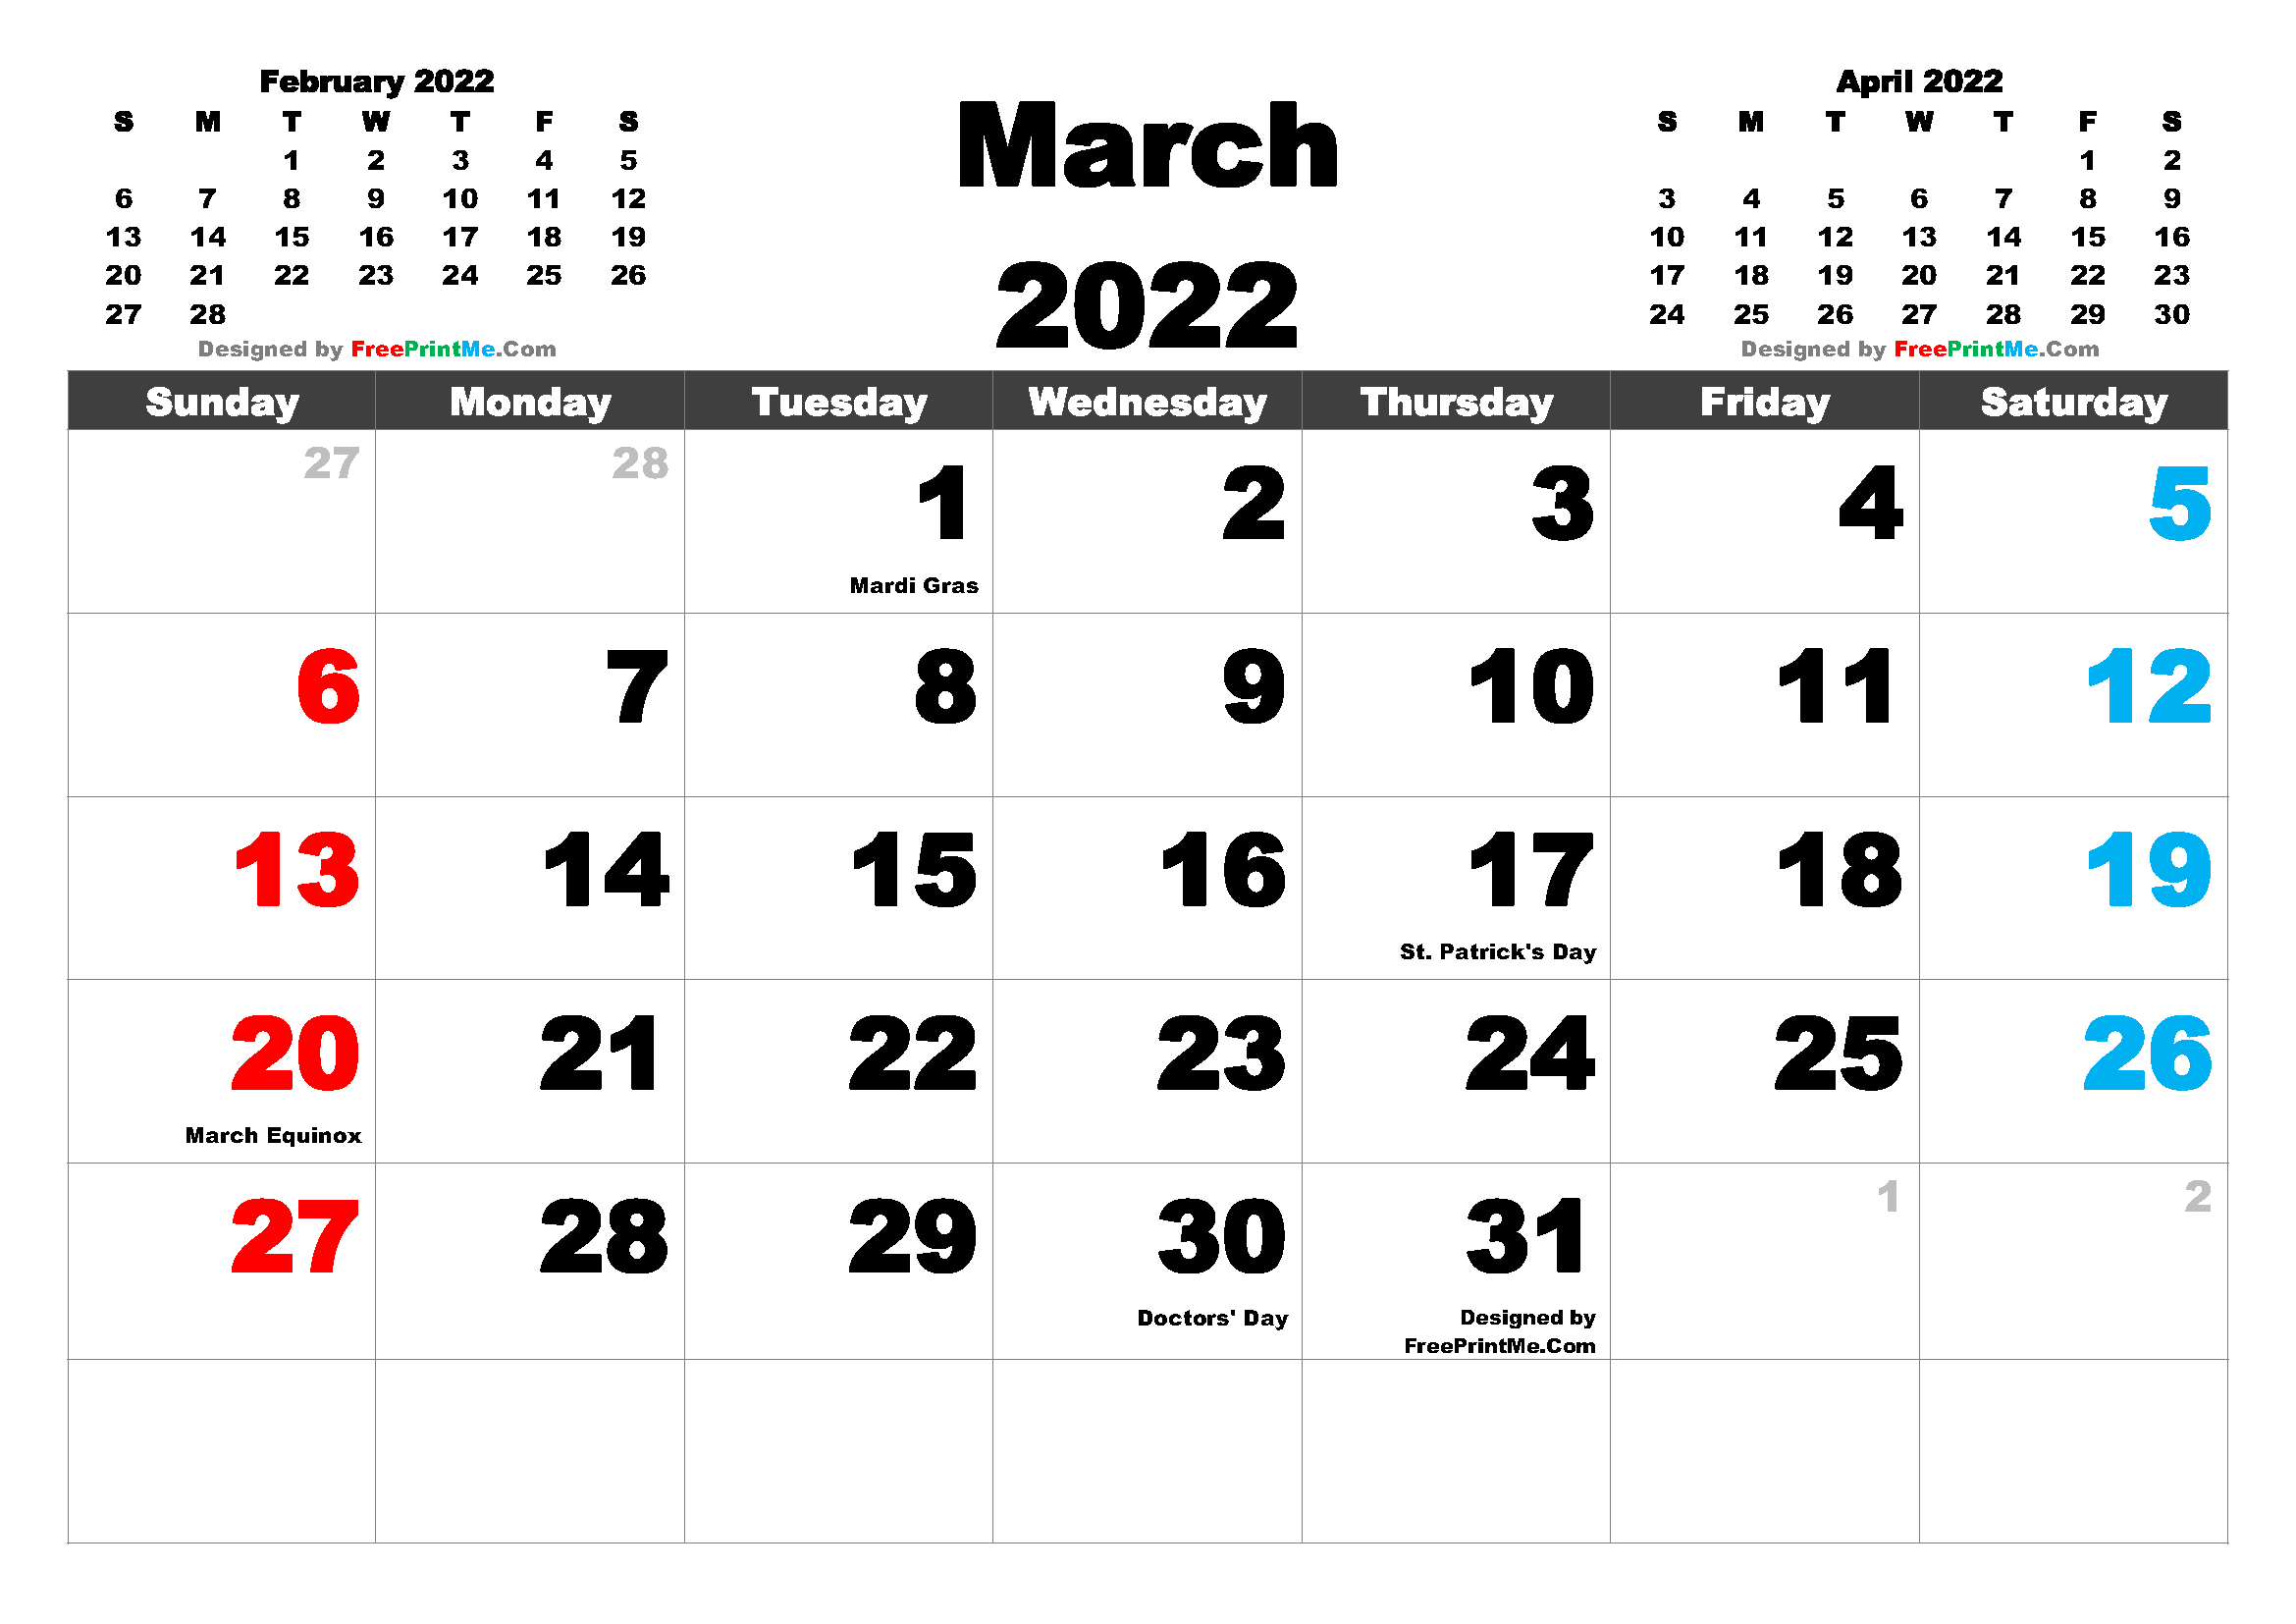 March 2022 Holiday Calendar Free Printable March 2022 Calendar Pdf And Image